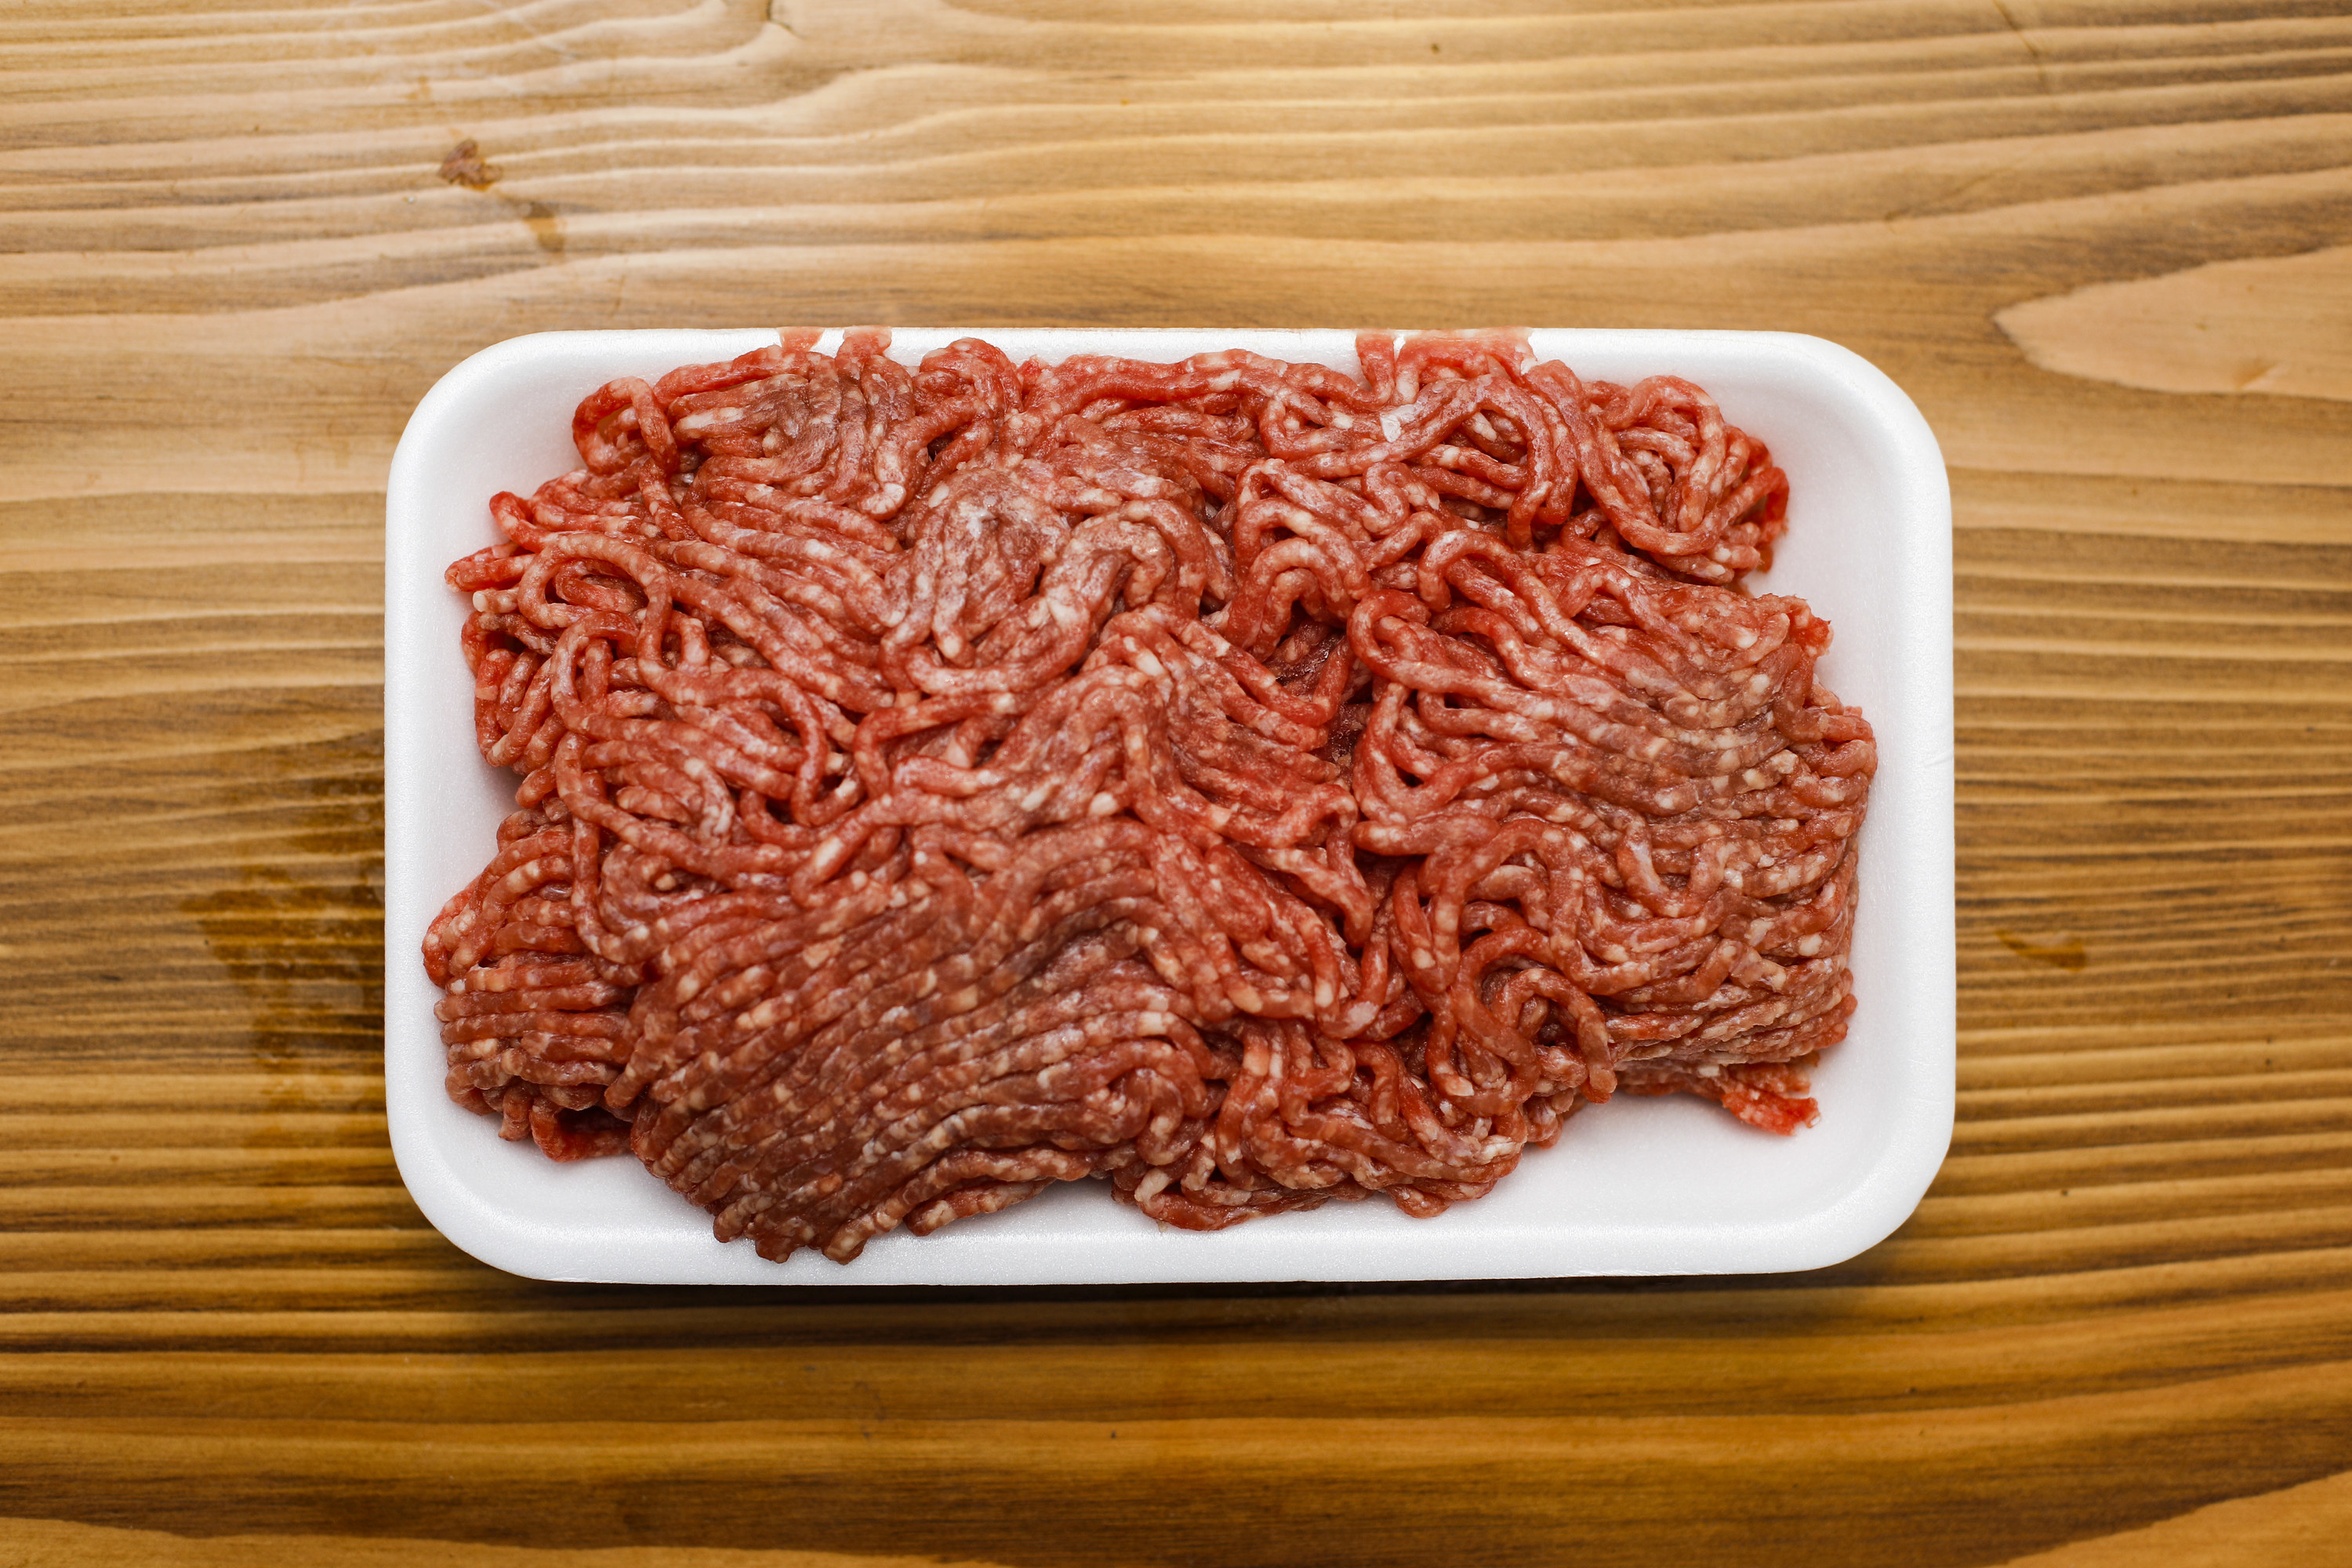 A detail of ground beef on the wooden table